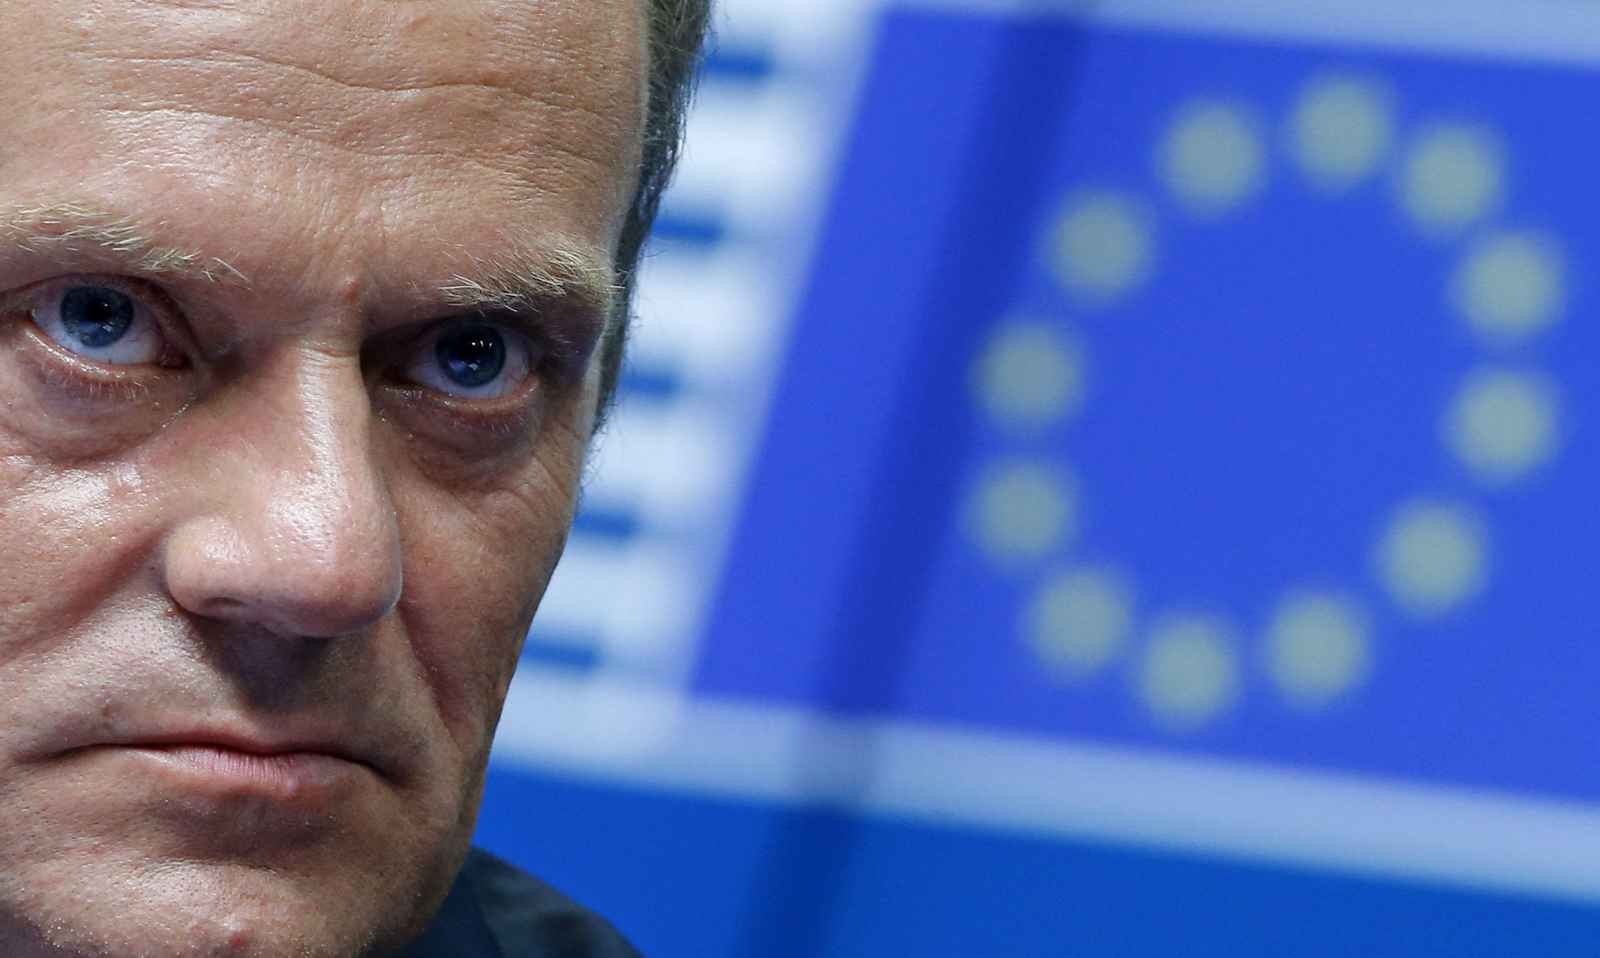 Newly elected European Council President Donald Tusk attends a news conference during an EU summit in Brussels August 30, 2014. European Union leaders chose Polish Prime Minister Tusk as the new president of their Council on Saturday and Italian Foreign Minister Federica Mogherini as the bloc's new foreign policy chief, outgoing European Council President Herman Van Rompuy said.       REUTERS/Yves Herman (BELGIUM - Tags: POLITICS)